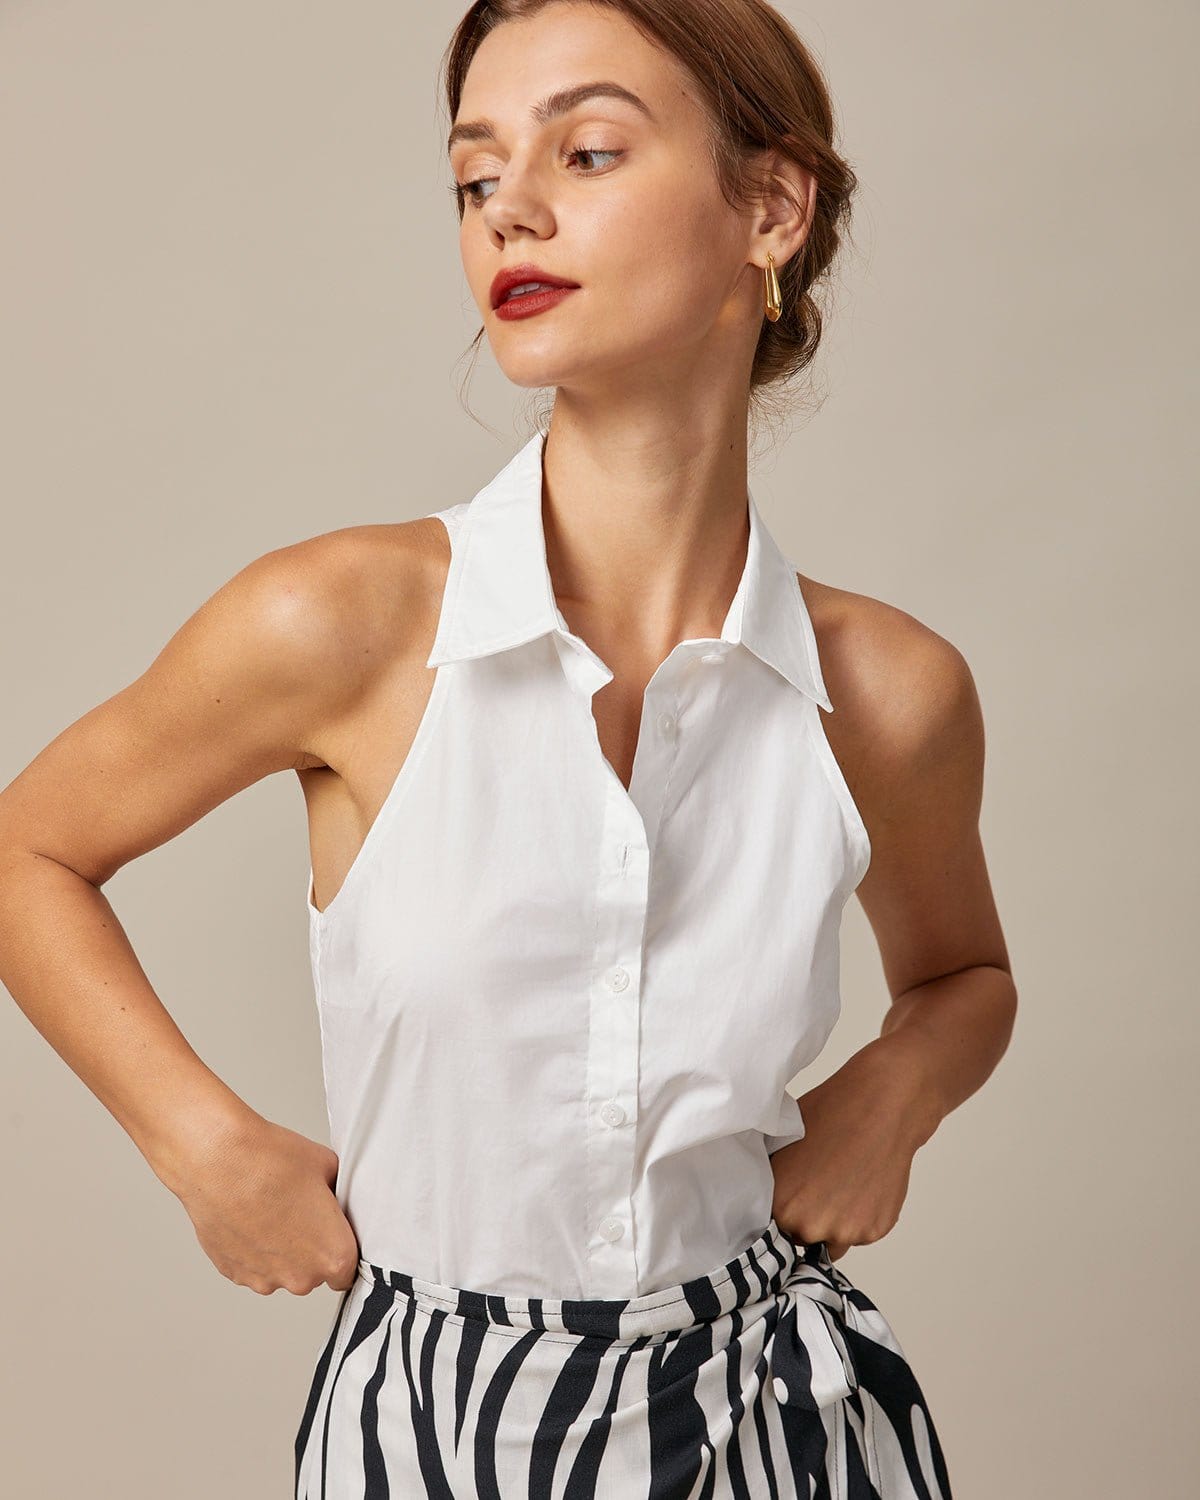 The White Collared Button Up Sleeveless Shirt